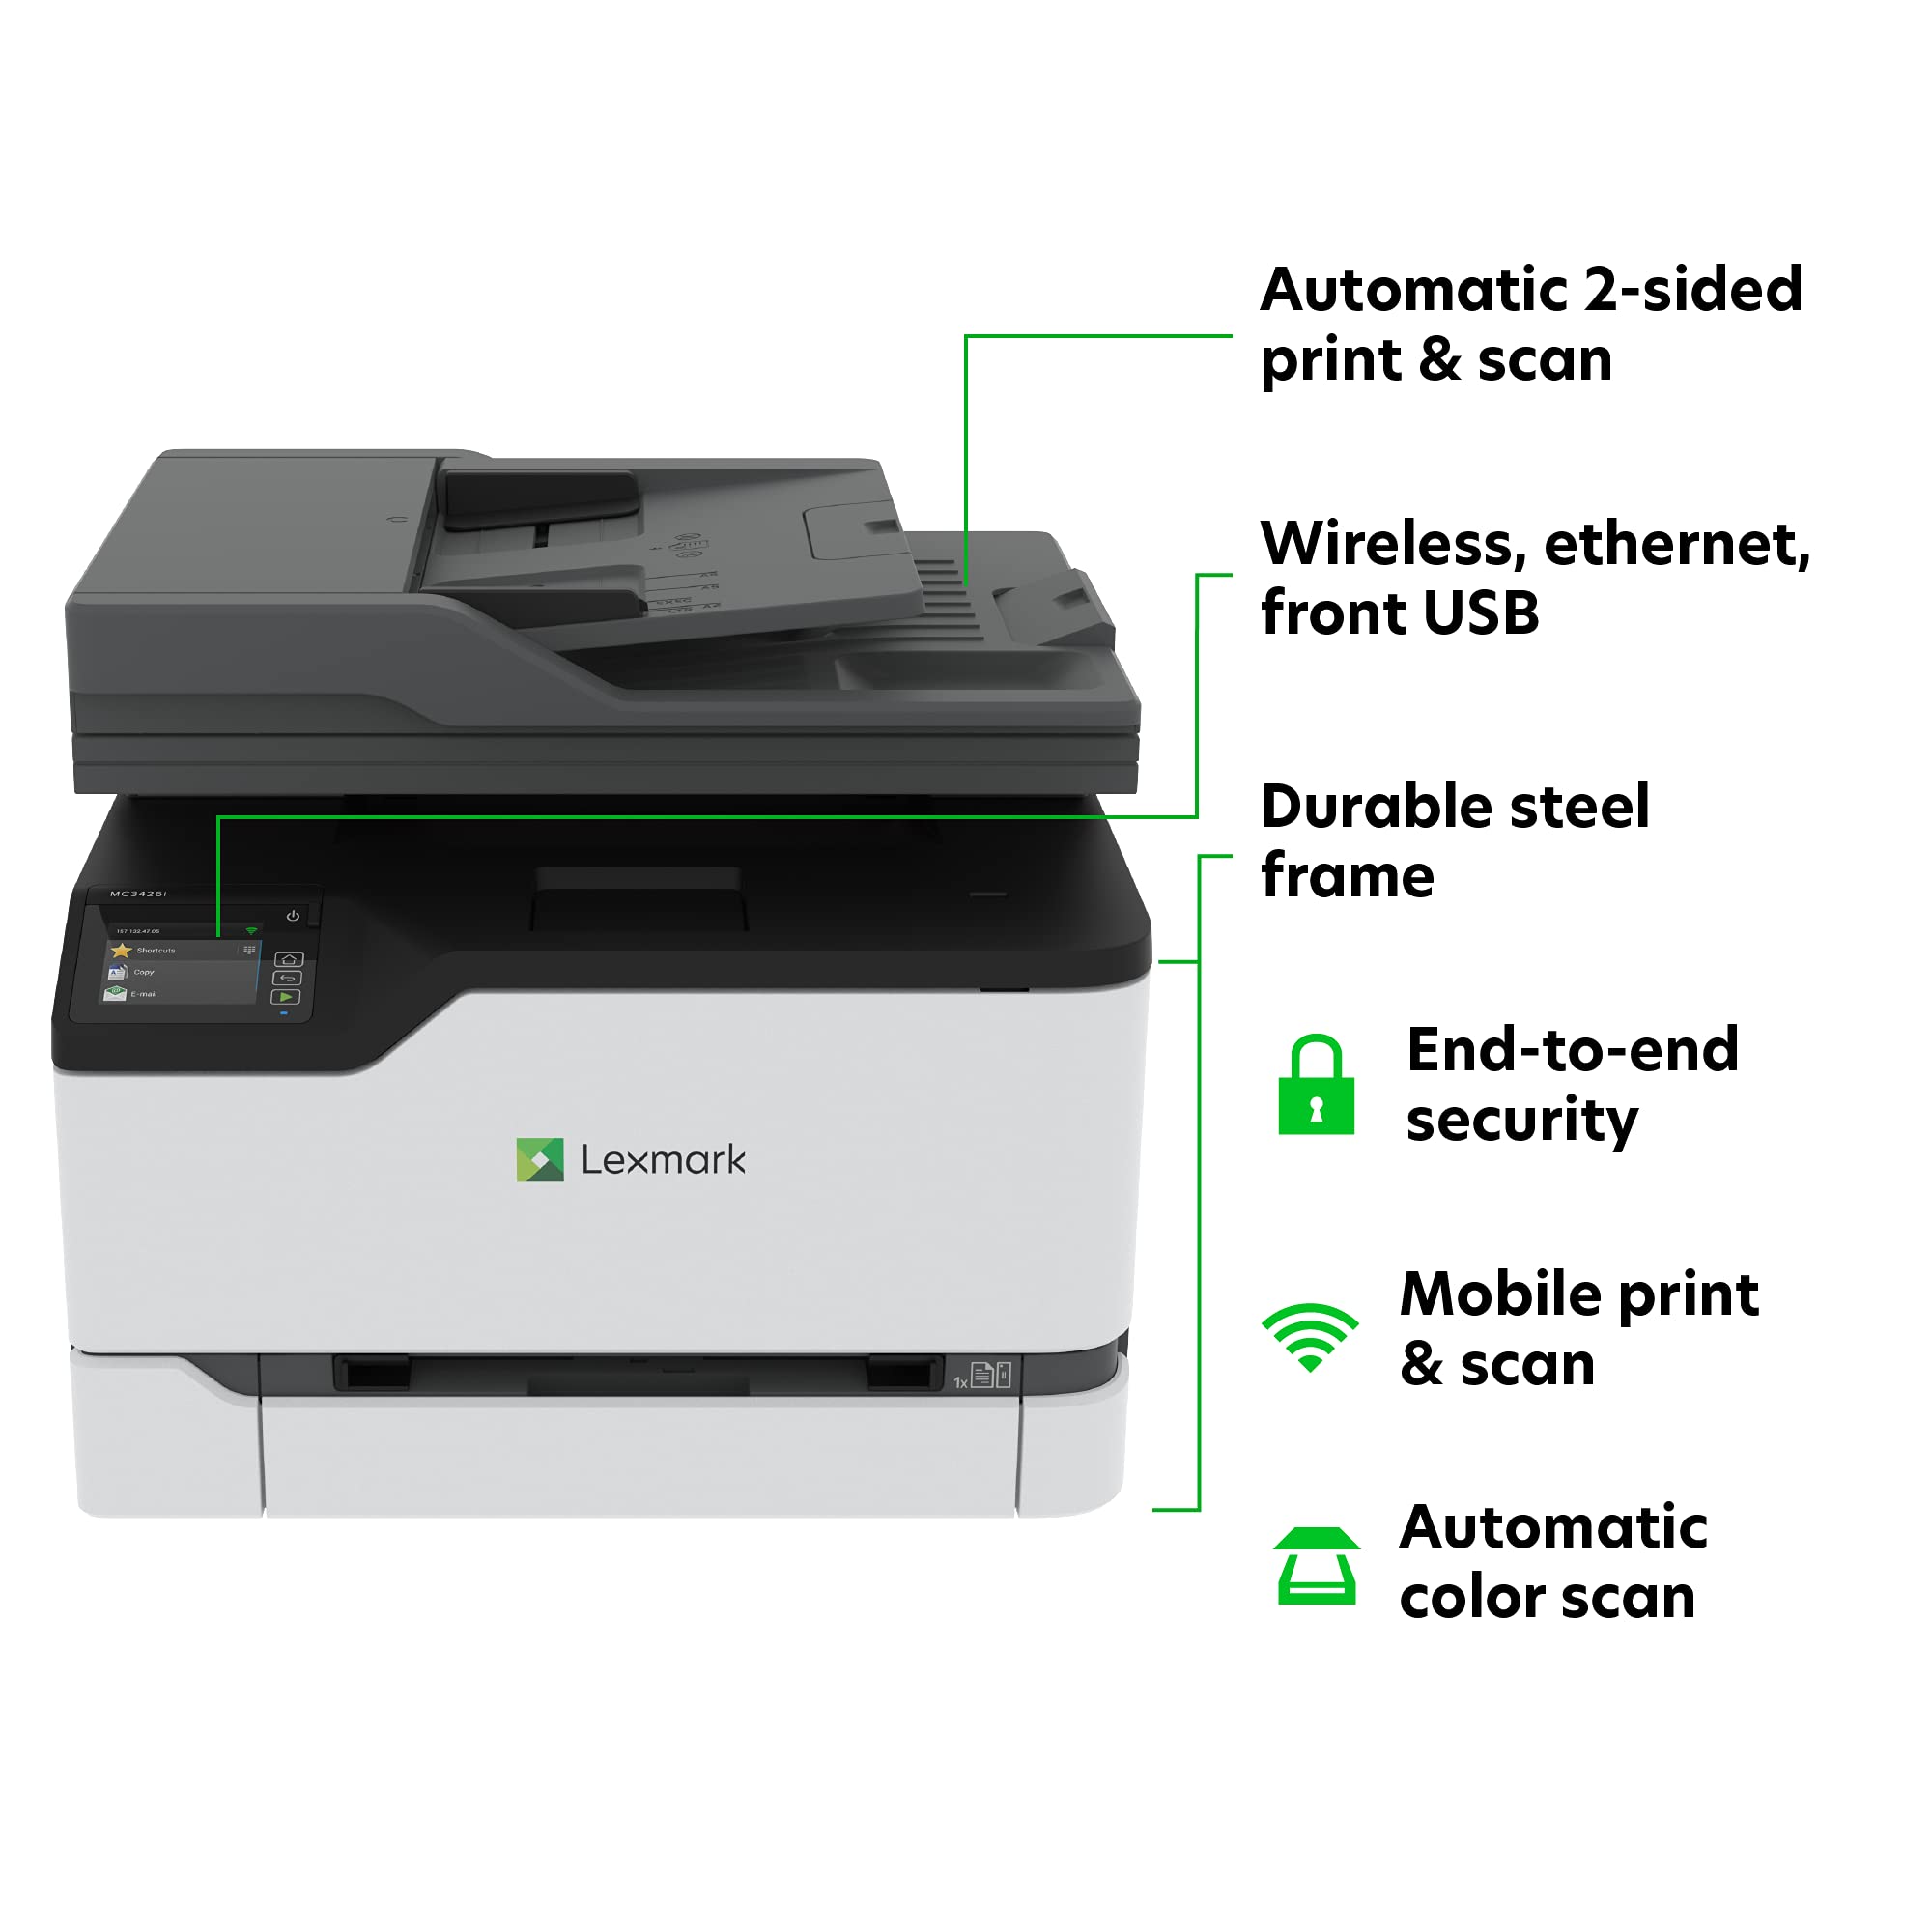 Lexmark MC3426i Color All-in-One Printer with Touchscreen, Multifunction Laser -for Office, Wireless, Mobile Ready & Duplex Printing (Print, Copy, Scan, Cloud Fax, 4-Series) White Small